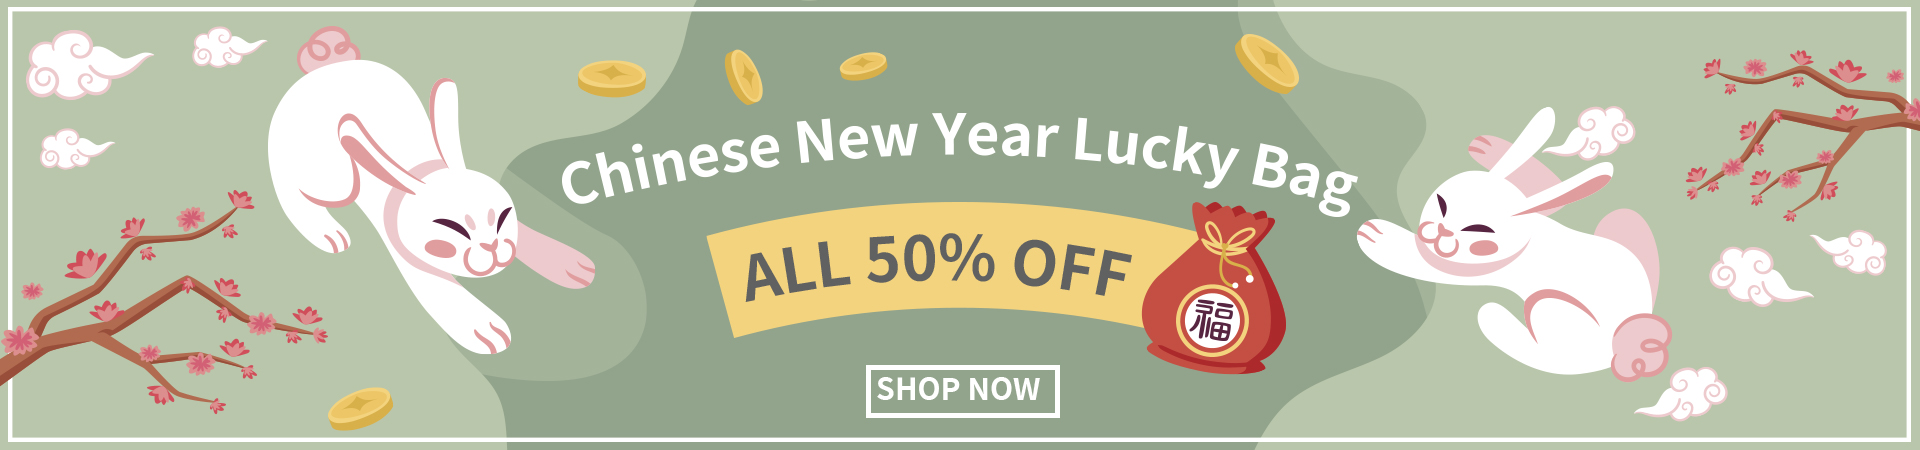 WEBSITE EXCLUSIVE: Year of The Rabbit HALF-PRICE Lucky Bag